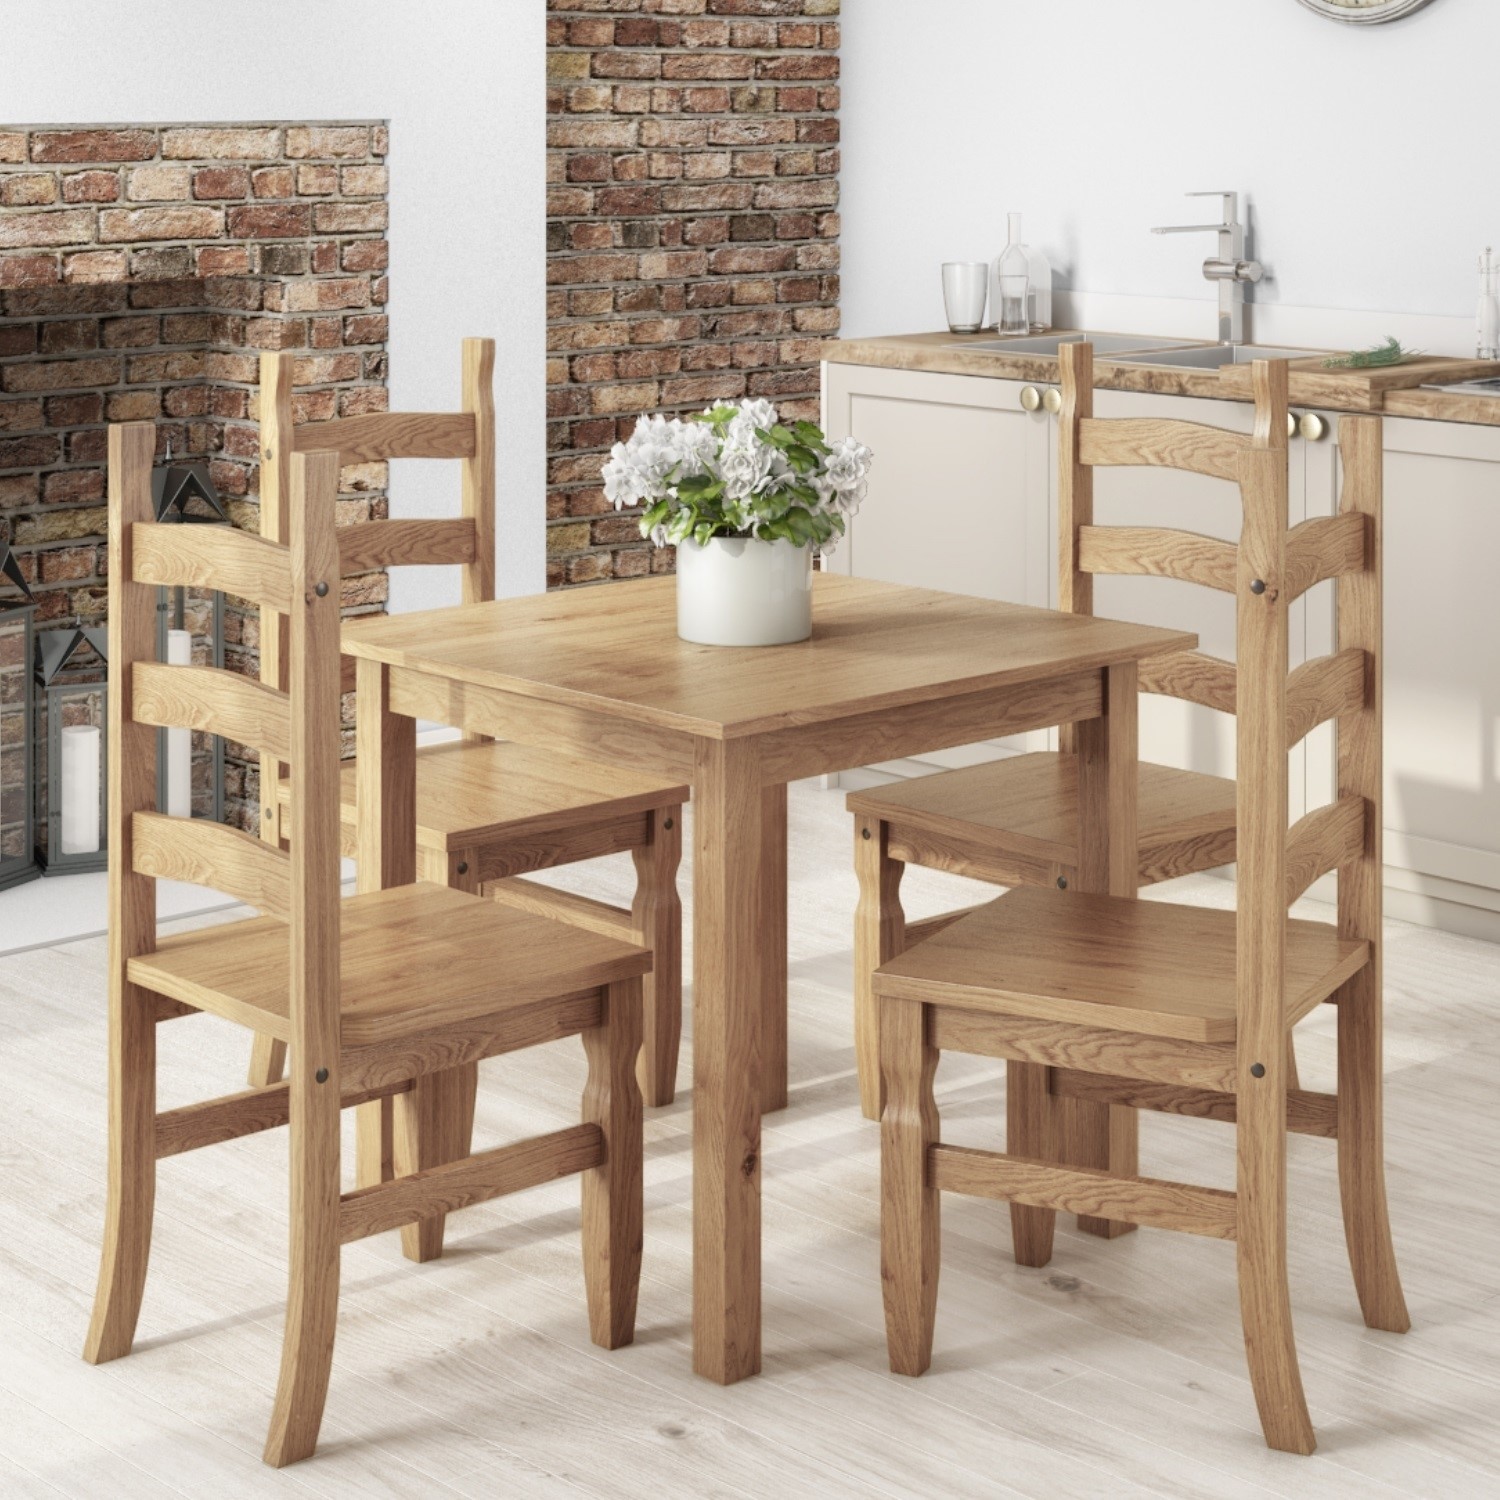 Home Discount Corona Dining Set 2 Seater Solid Pine Wood With 2 Chairs Rustic Wax Finish